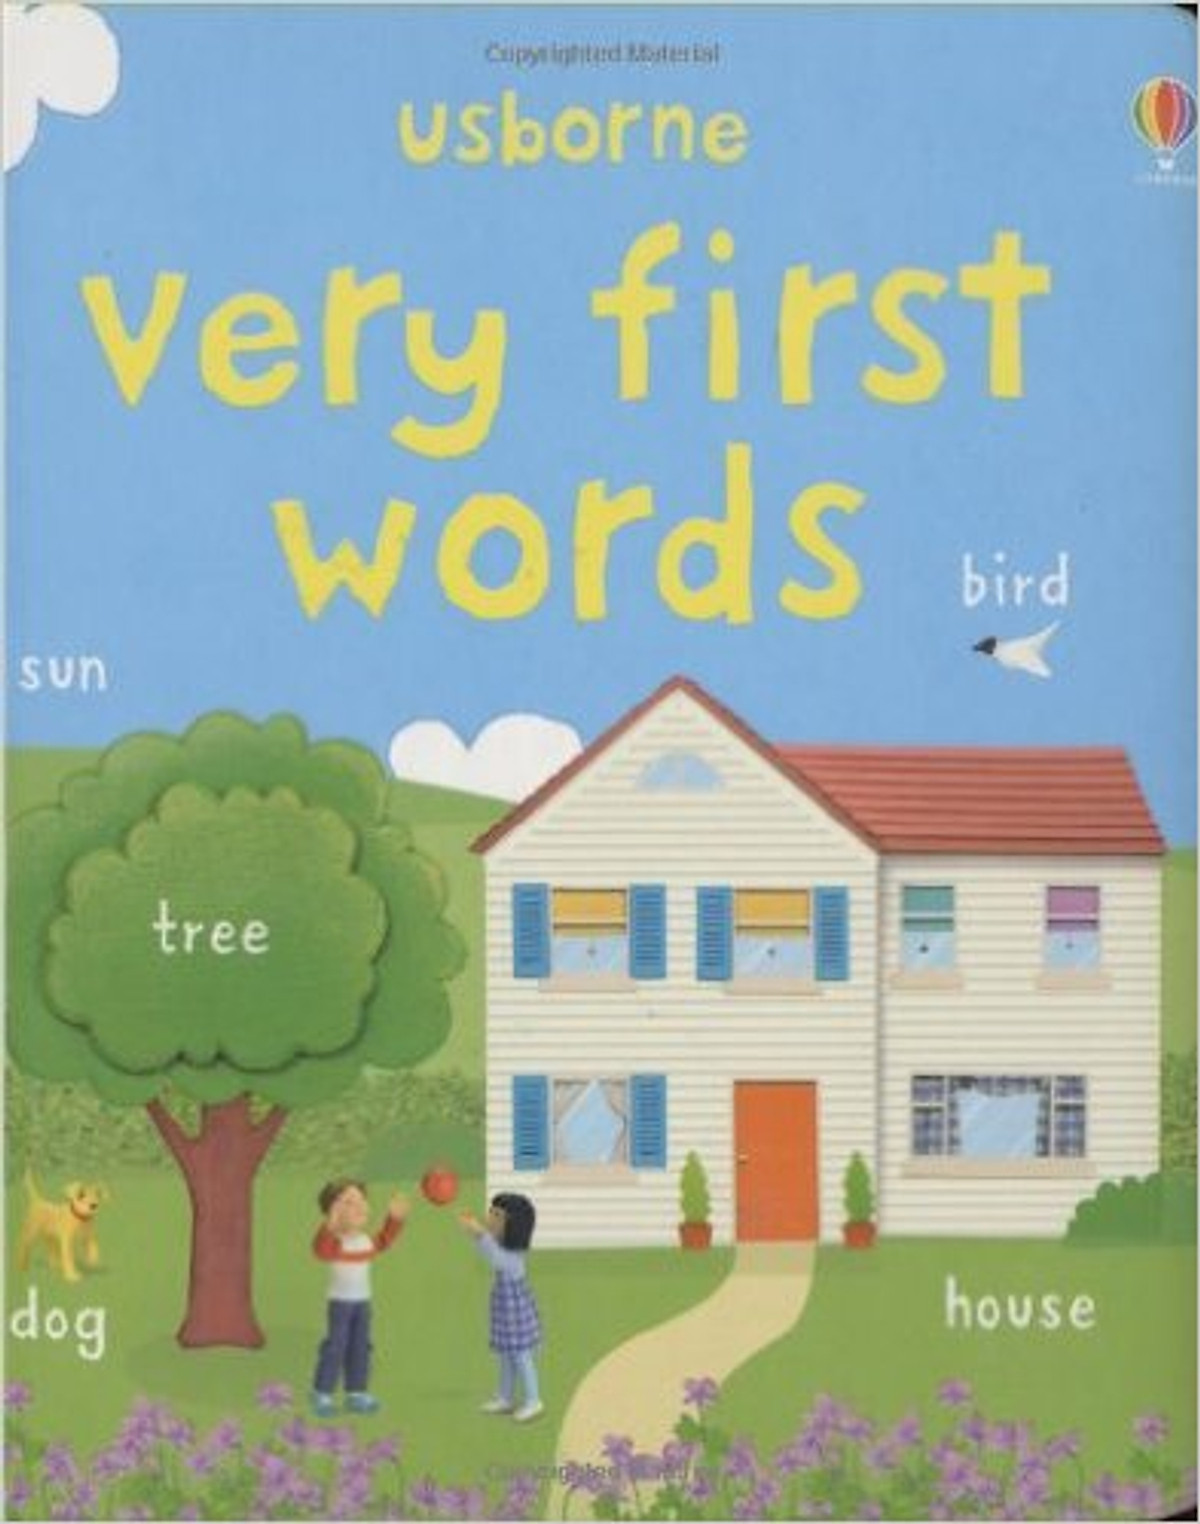 Year book words. Usborne very first Words. My first Word book. My very first book of food. My very first book of Words.